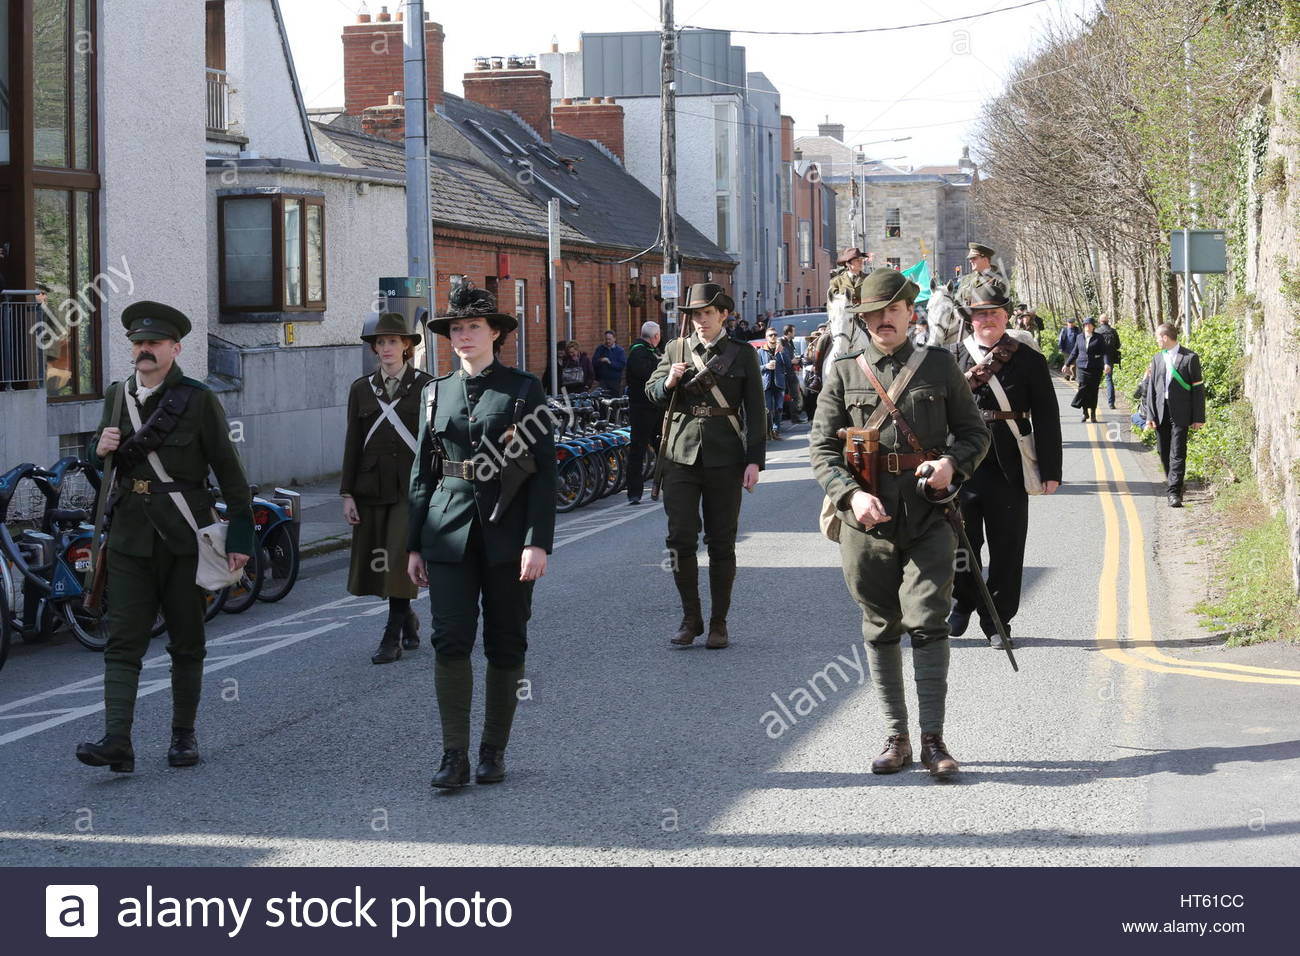 Participants in mock costumes march towards Arbour Hill from Kilmainham during the centenary celebrations of the 1916 Easter Rising Stock Photo